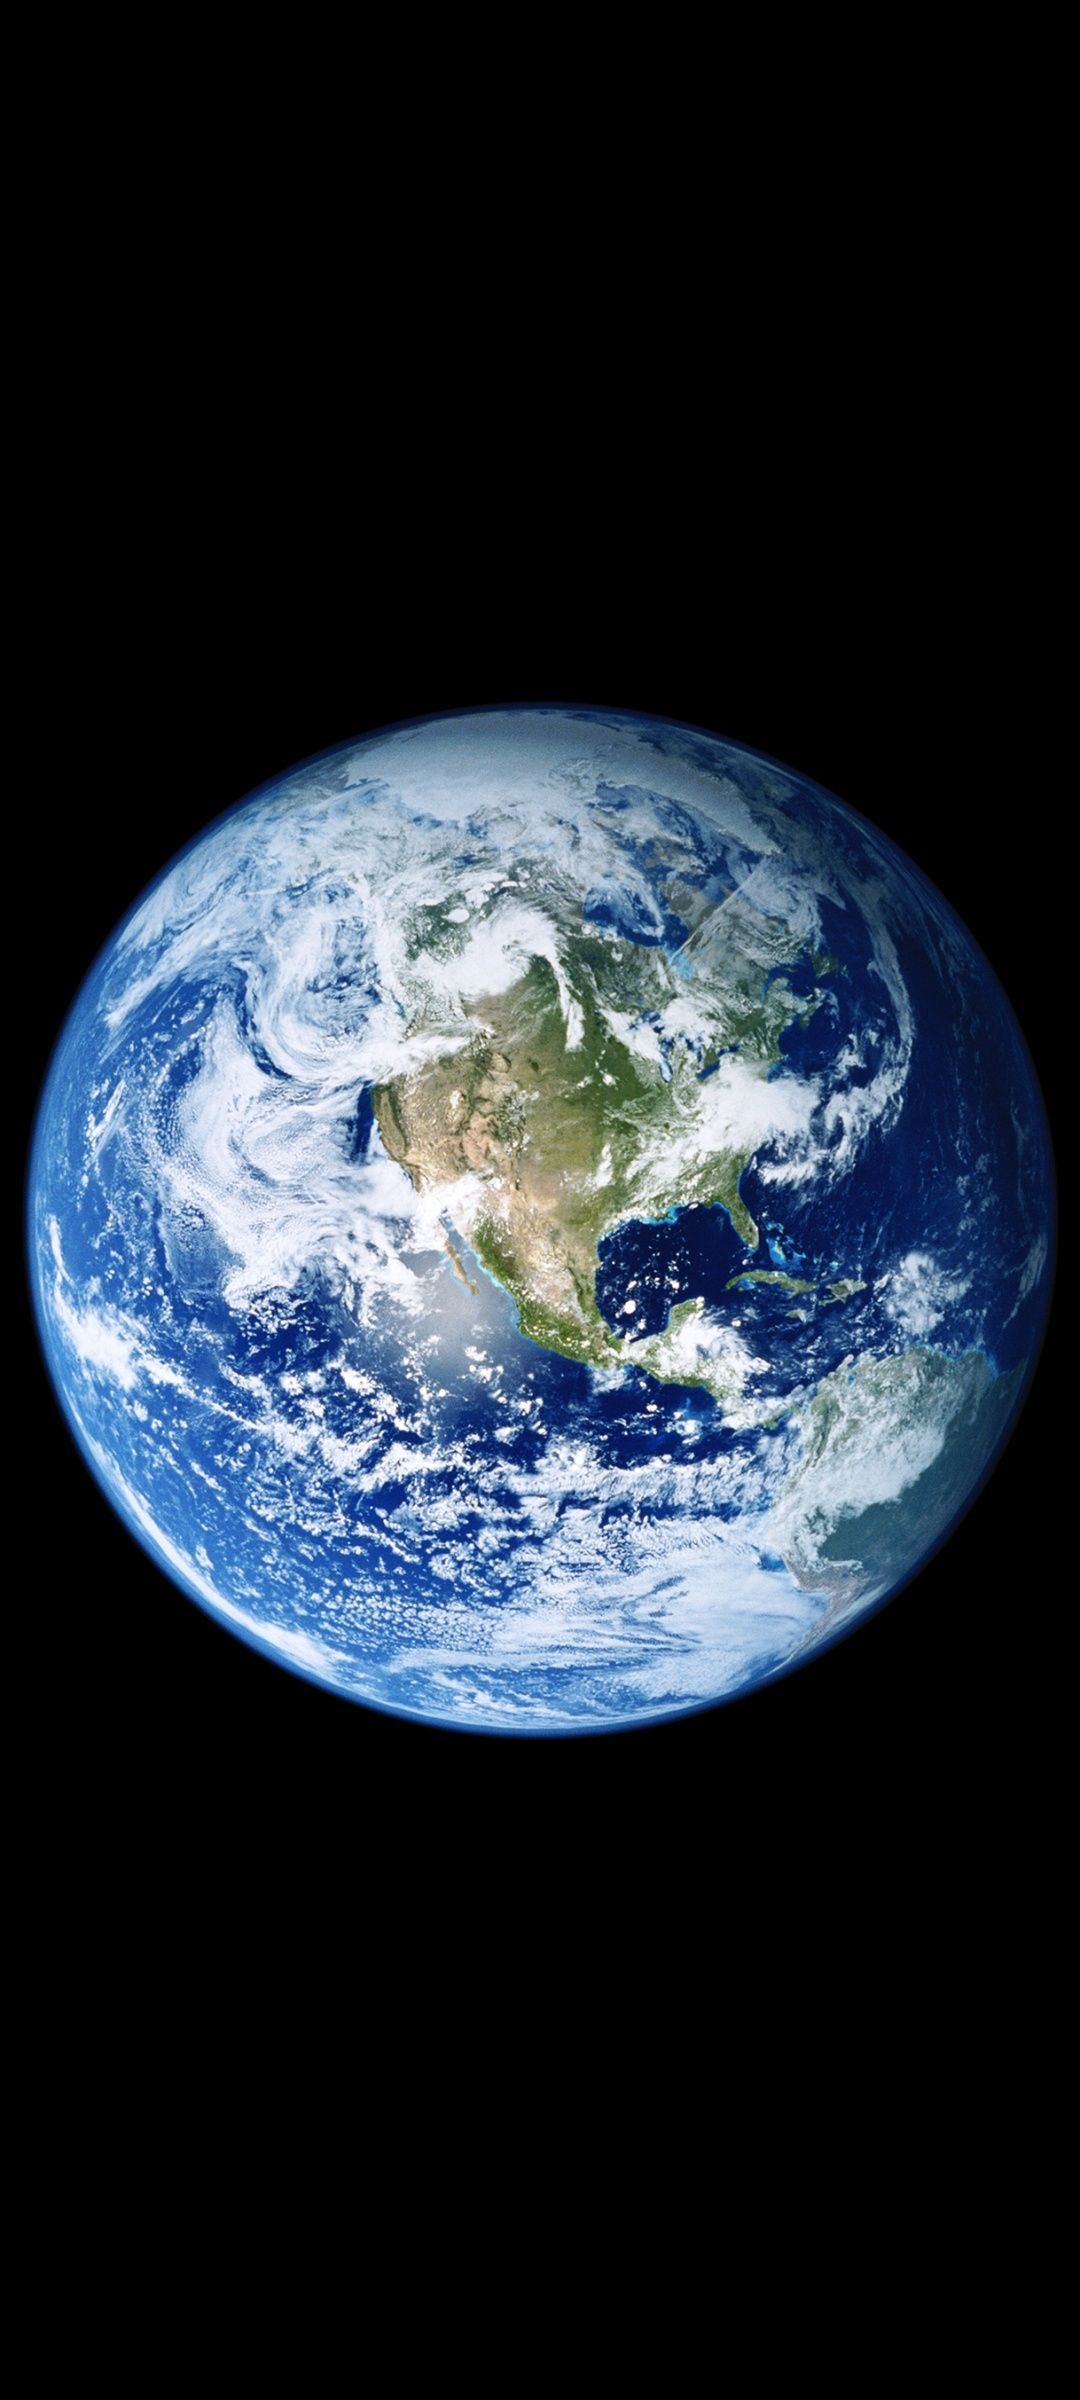 A picture of the earth from space - Earth